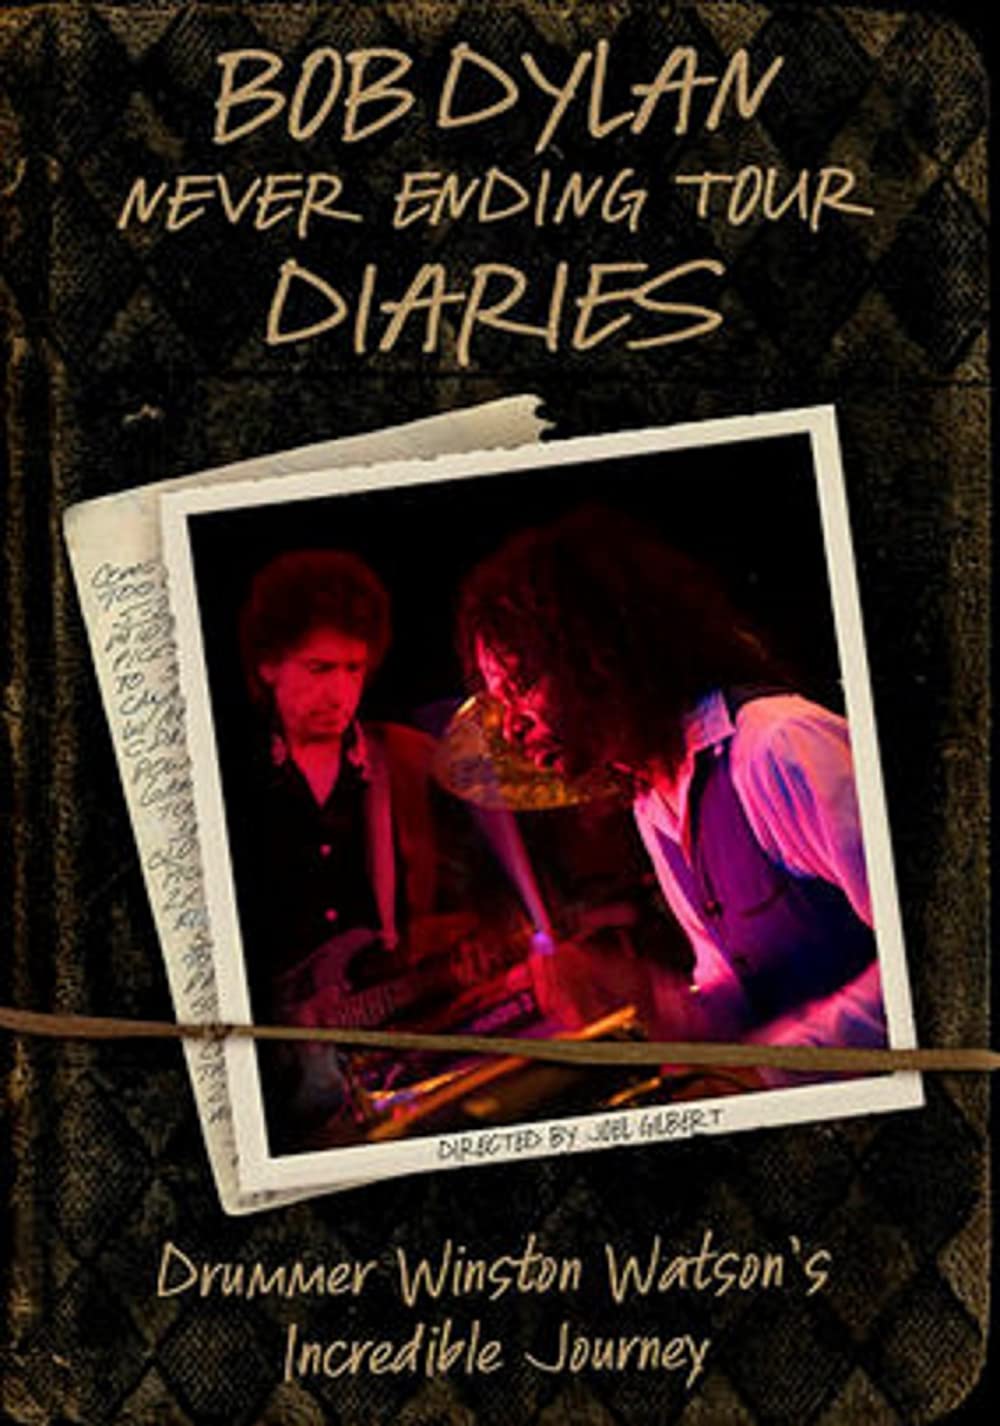 Download Bob Dylan Never Ending Tour Diaries: Drummer Winston Watson's Incredible Journey Movie | Bob Dylan Never Ending Tour Diaries: Drummer Winston Watson's Incredible Journey Hd, Dvd